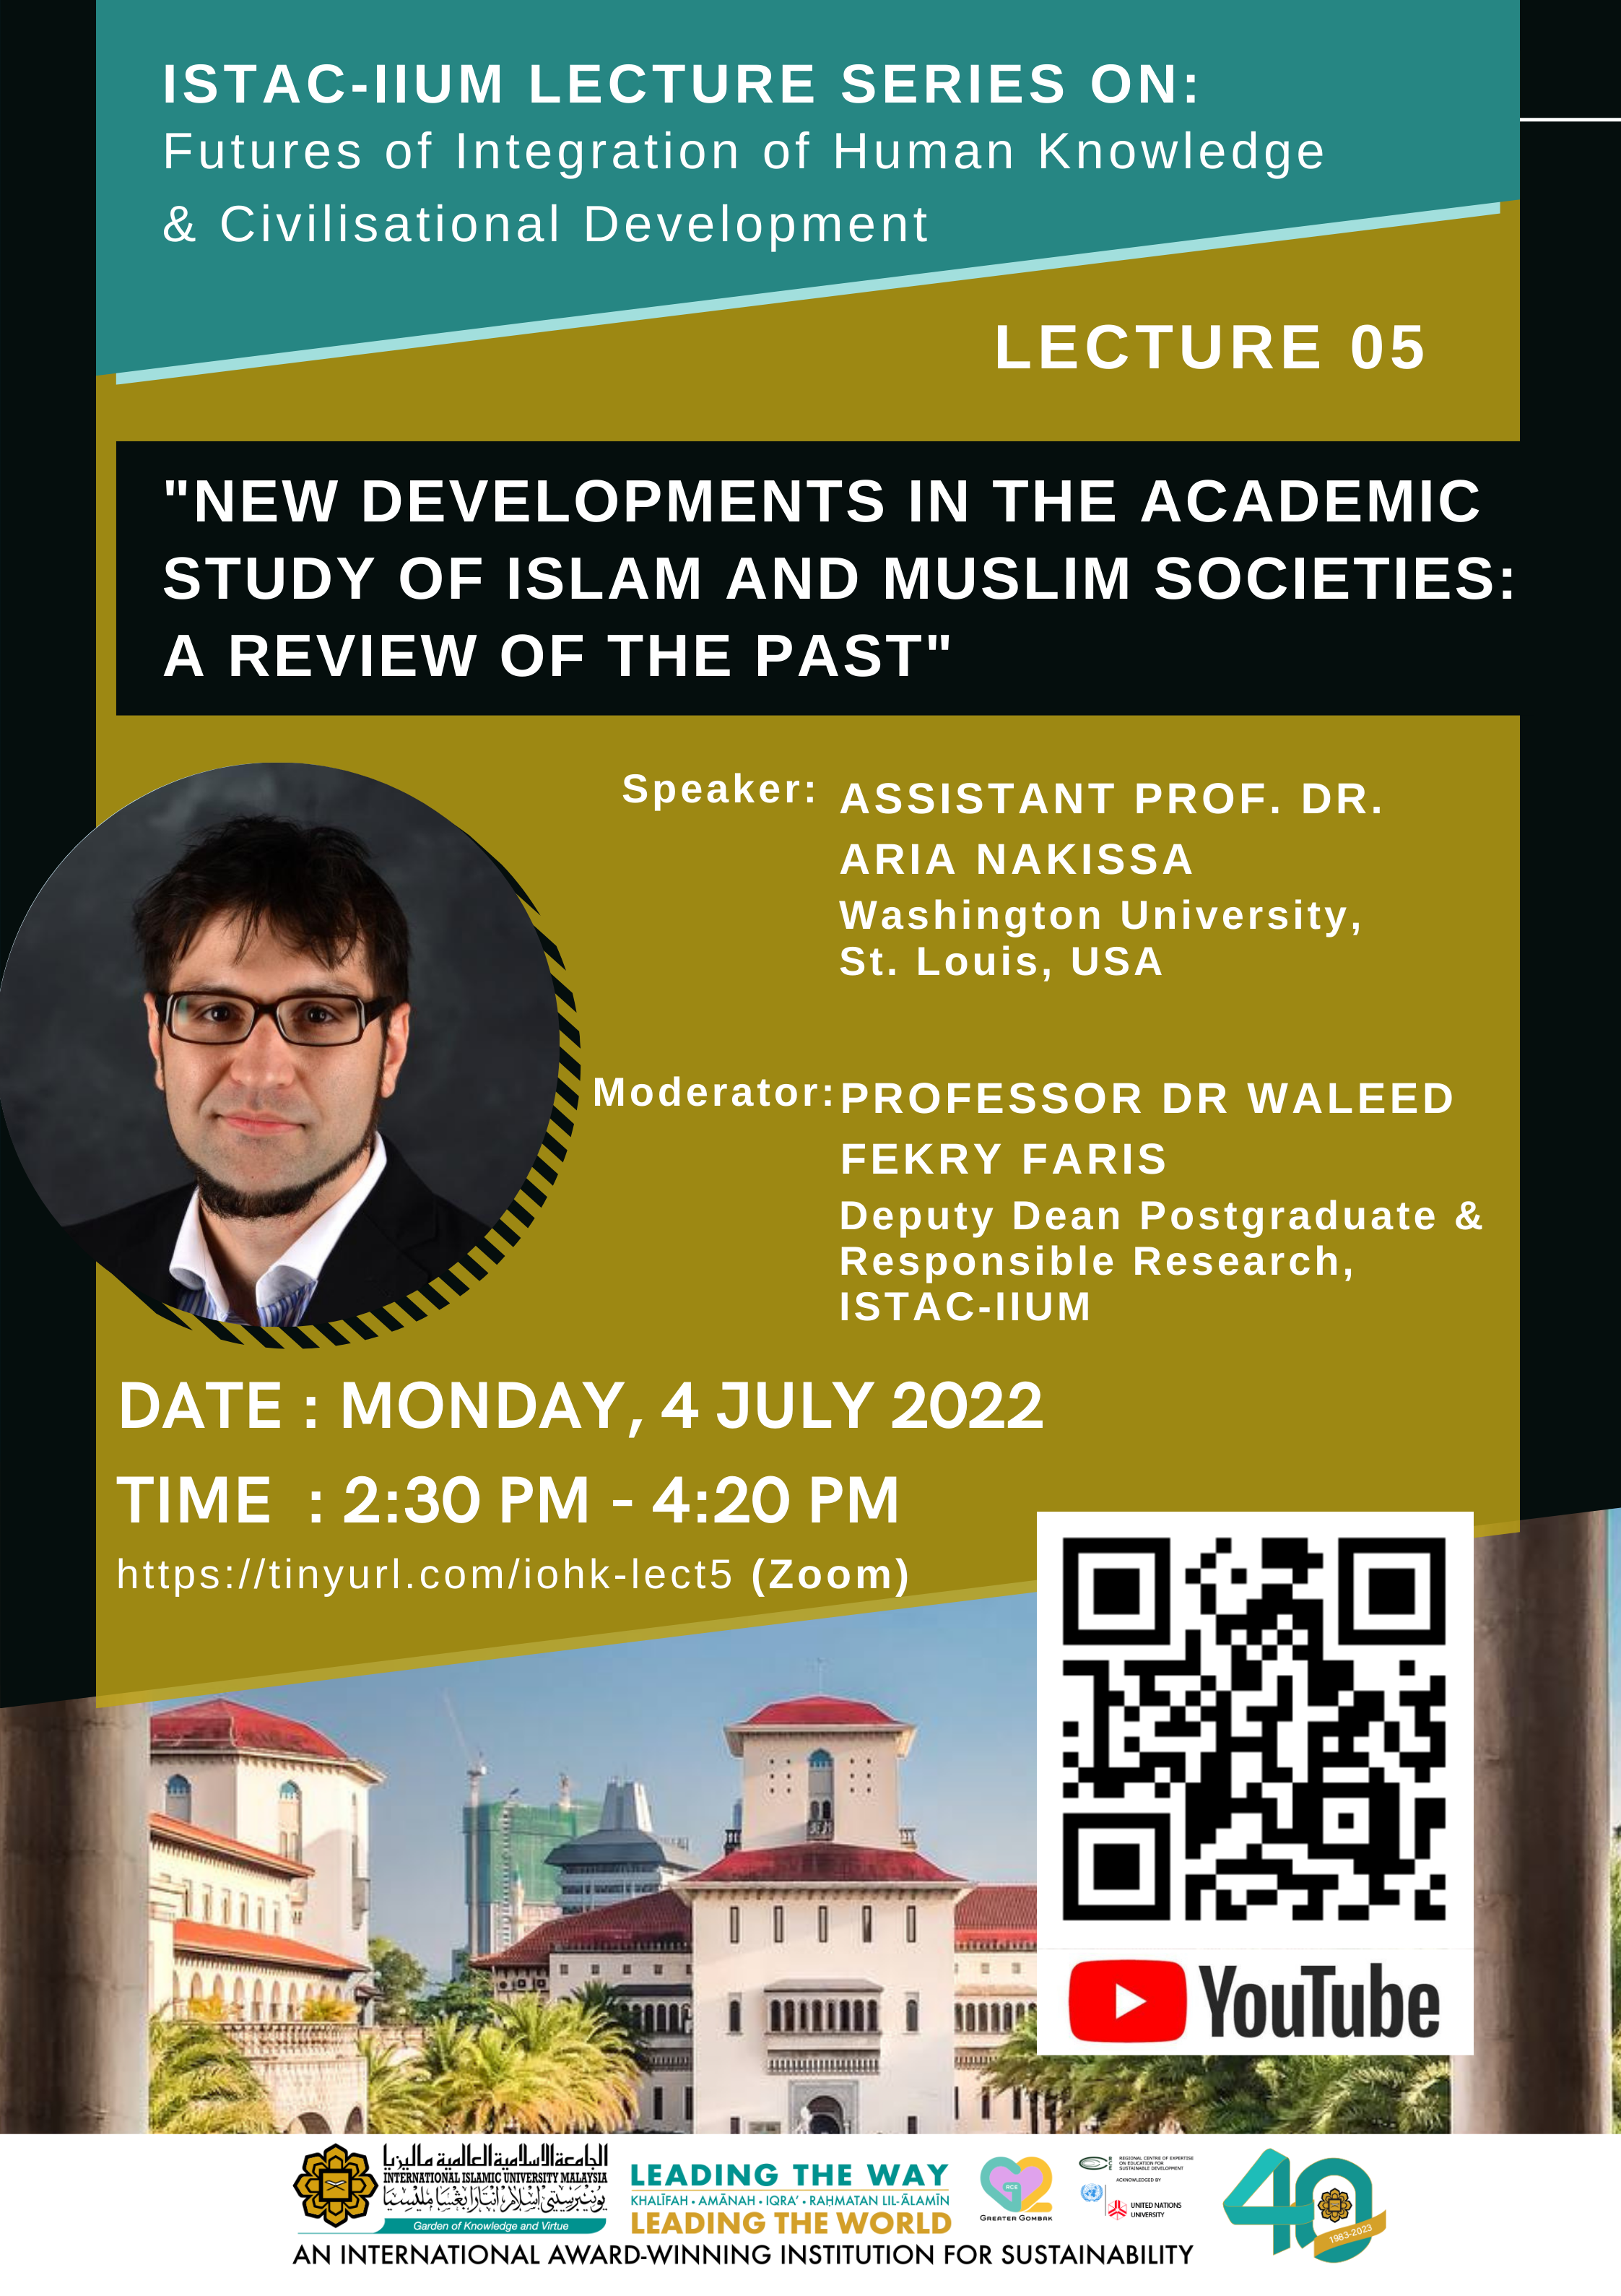 ISTAC-IIUM LECTURE SERIES 05: ON FUTURES OF INTEGRATION OF HUMAN KNOWLEDGE & CIVILISATIONAL DEVELOPMENT